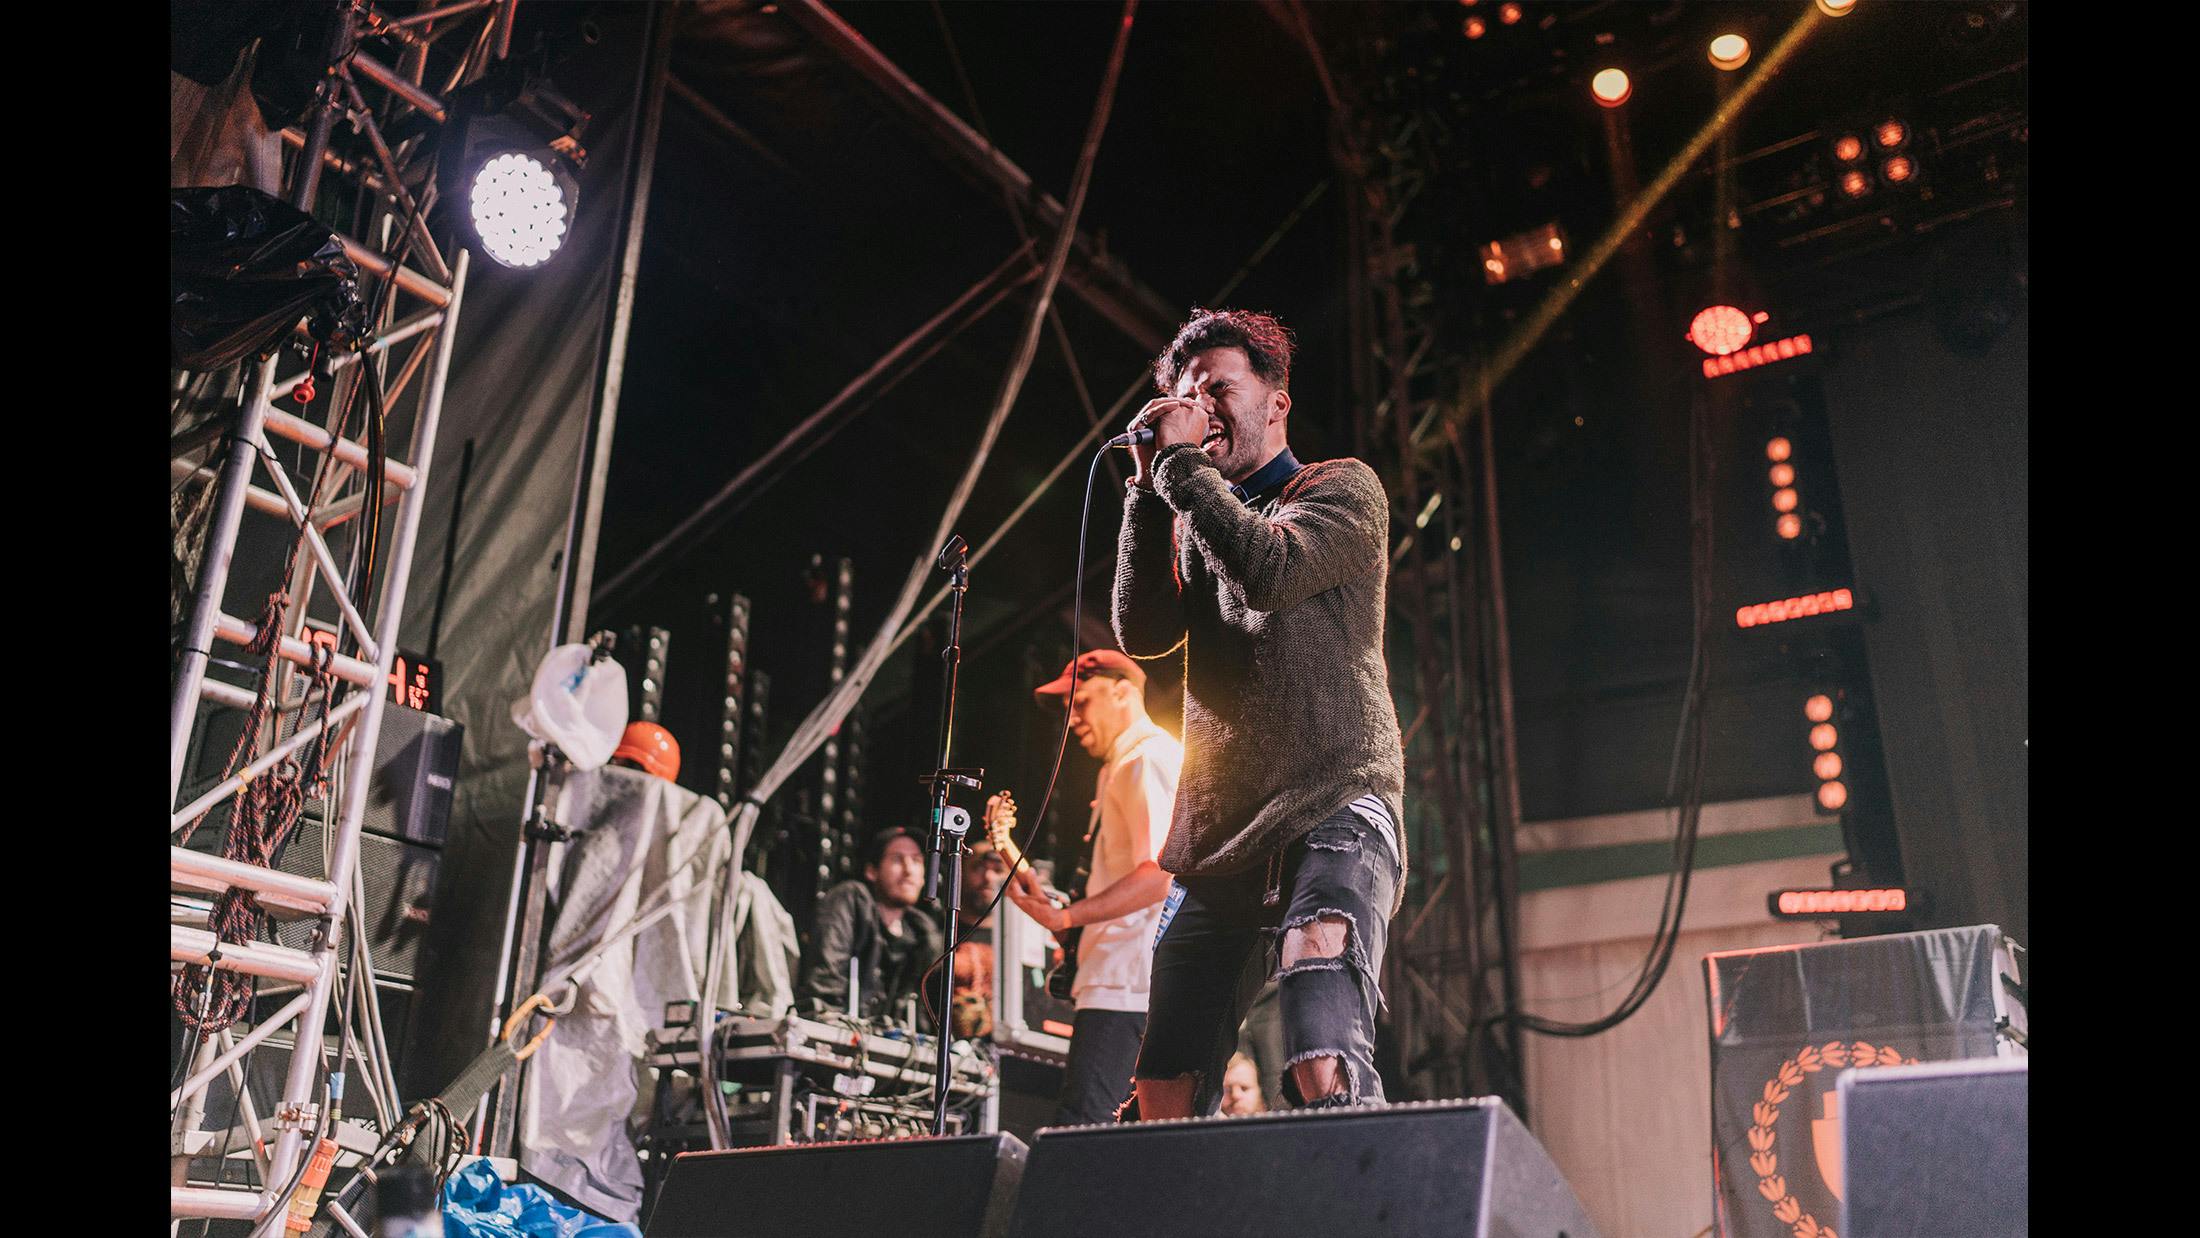 No, Aussie heroes Northlane aren't on the bill at UNIFY (they played last year, duh). But that doesn't stop frontman Marcus Bridge turning up to the Tarwin Lower festival and joining Hellions onstage, reminding everyone that he's a force to be reckoned with. Total dude.